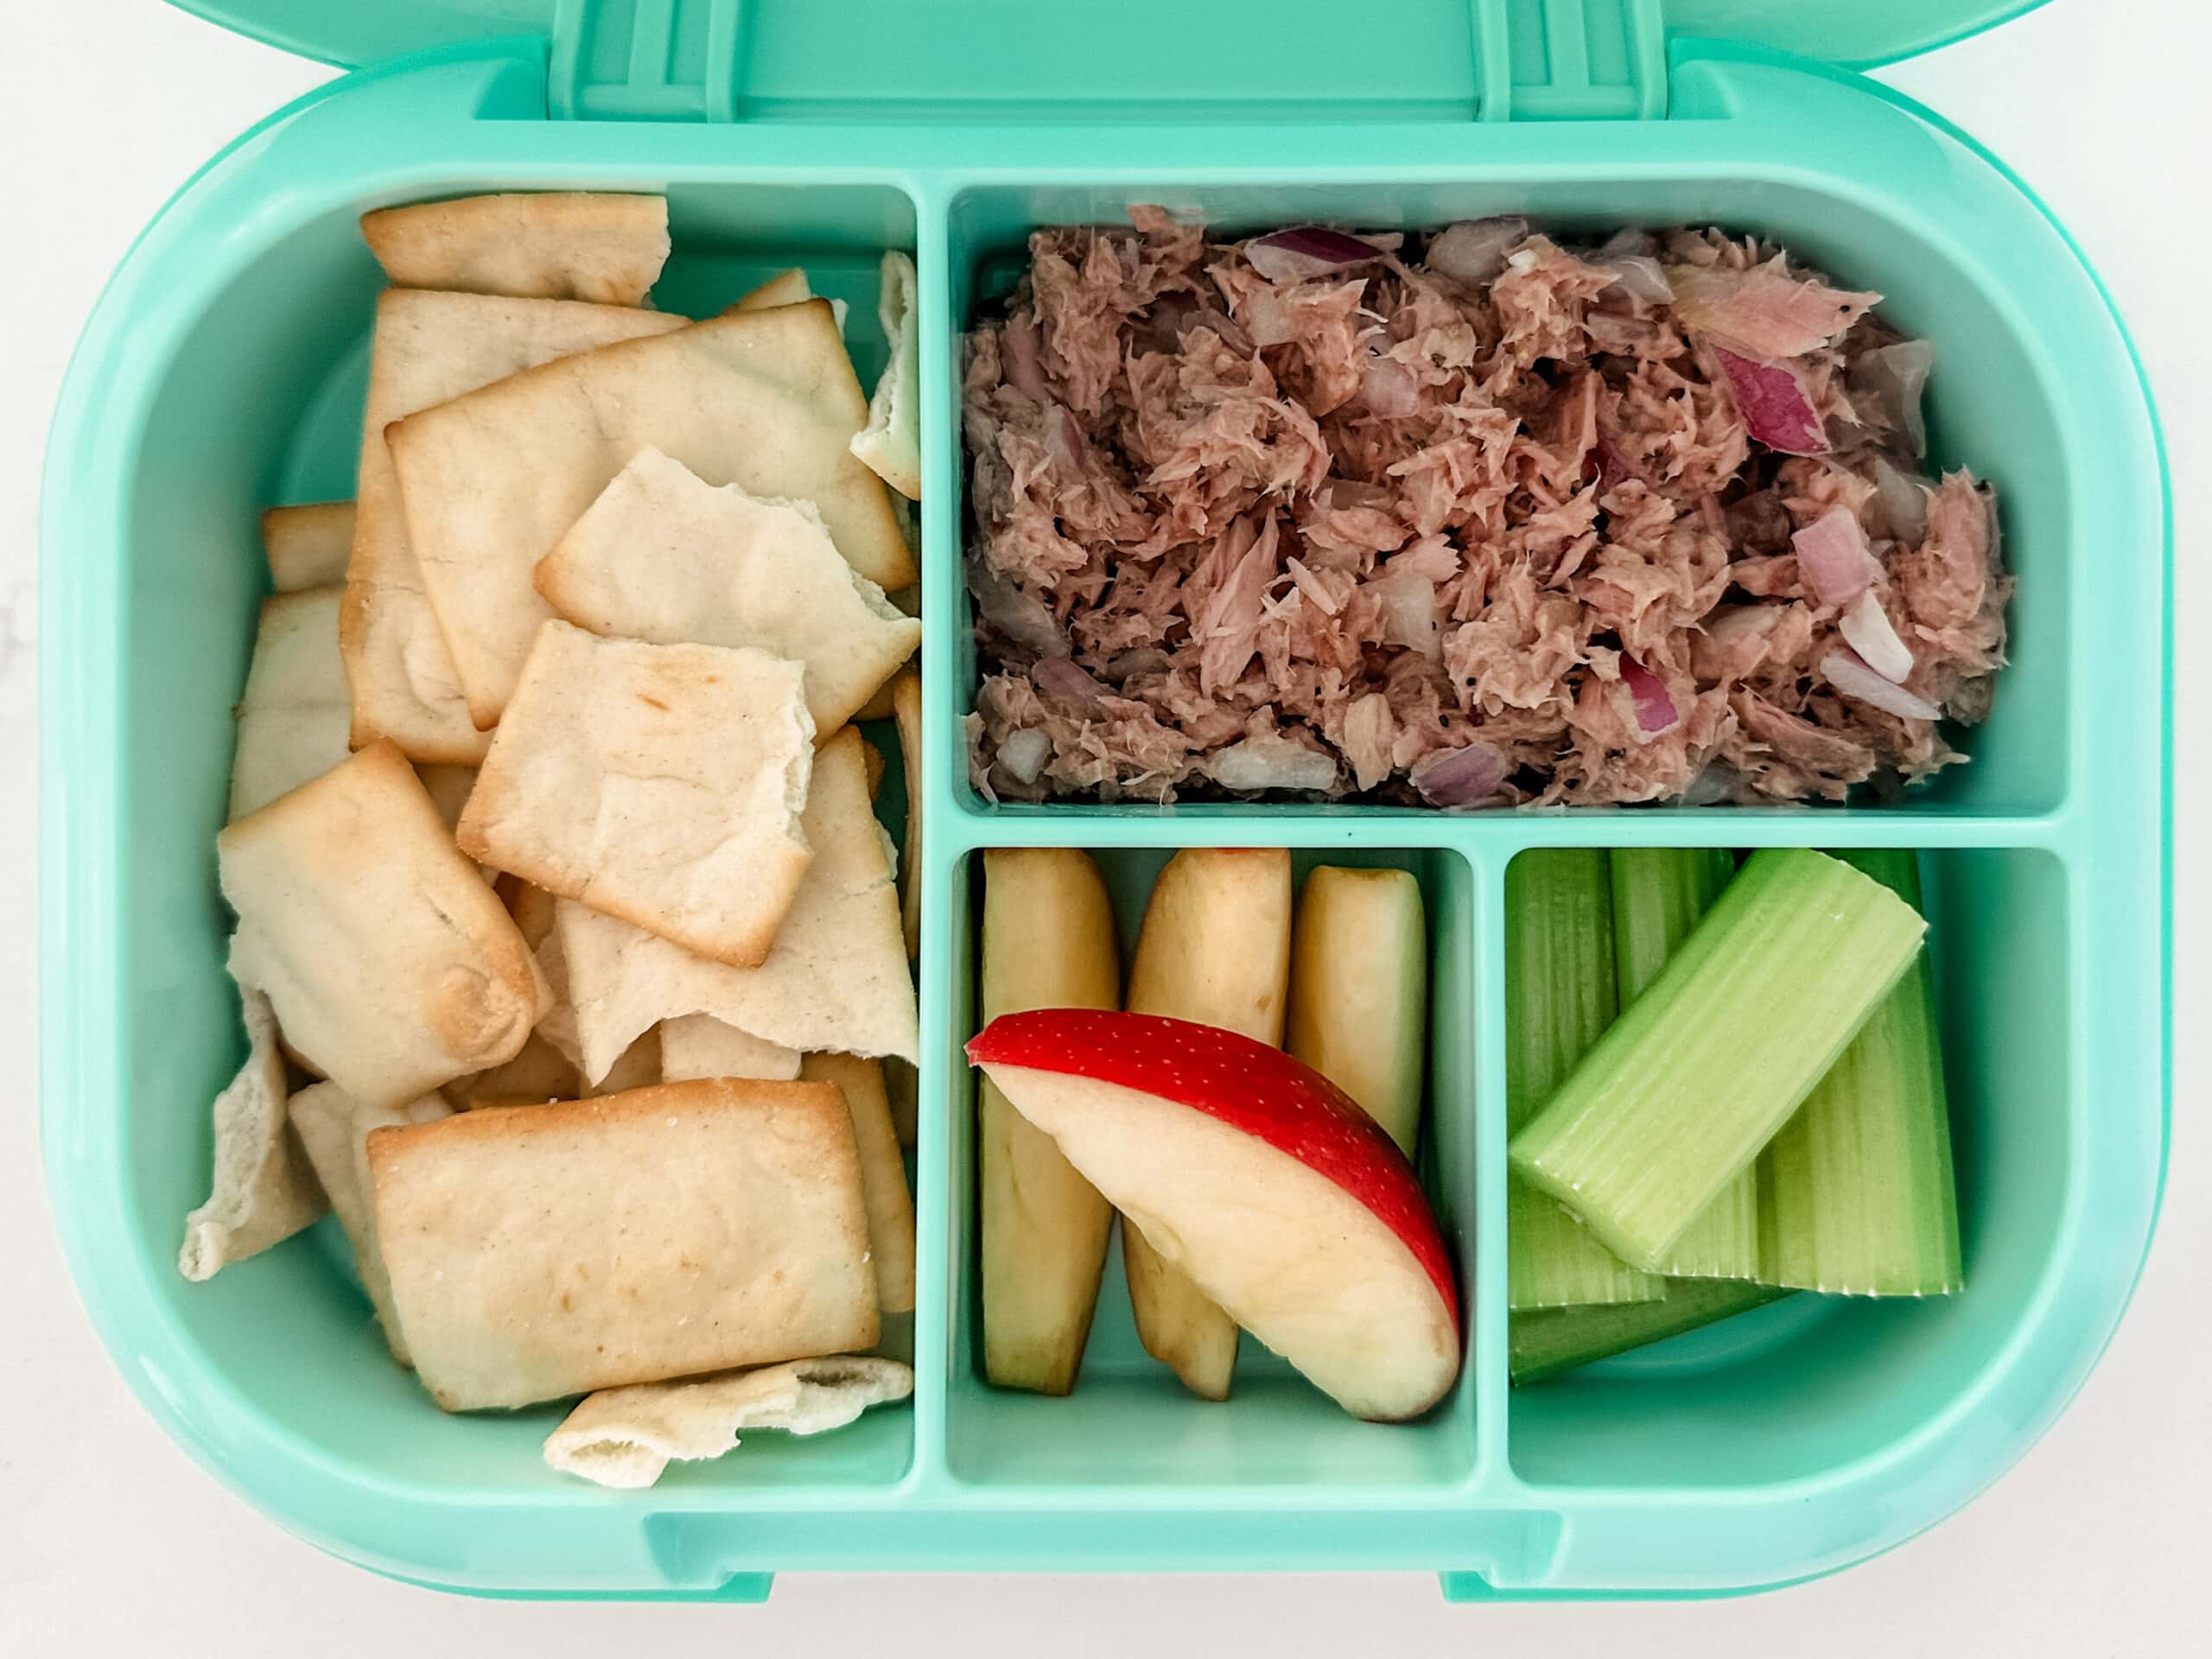 Mint green bento box for kids filled with tuna salad, pita chips, apple slices, celery sticks